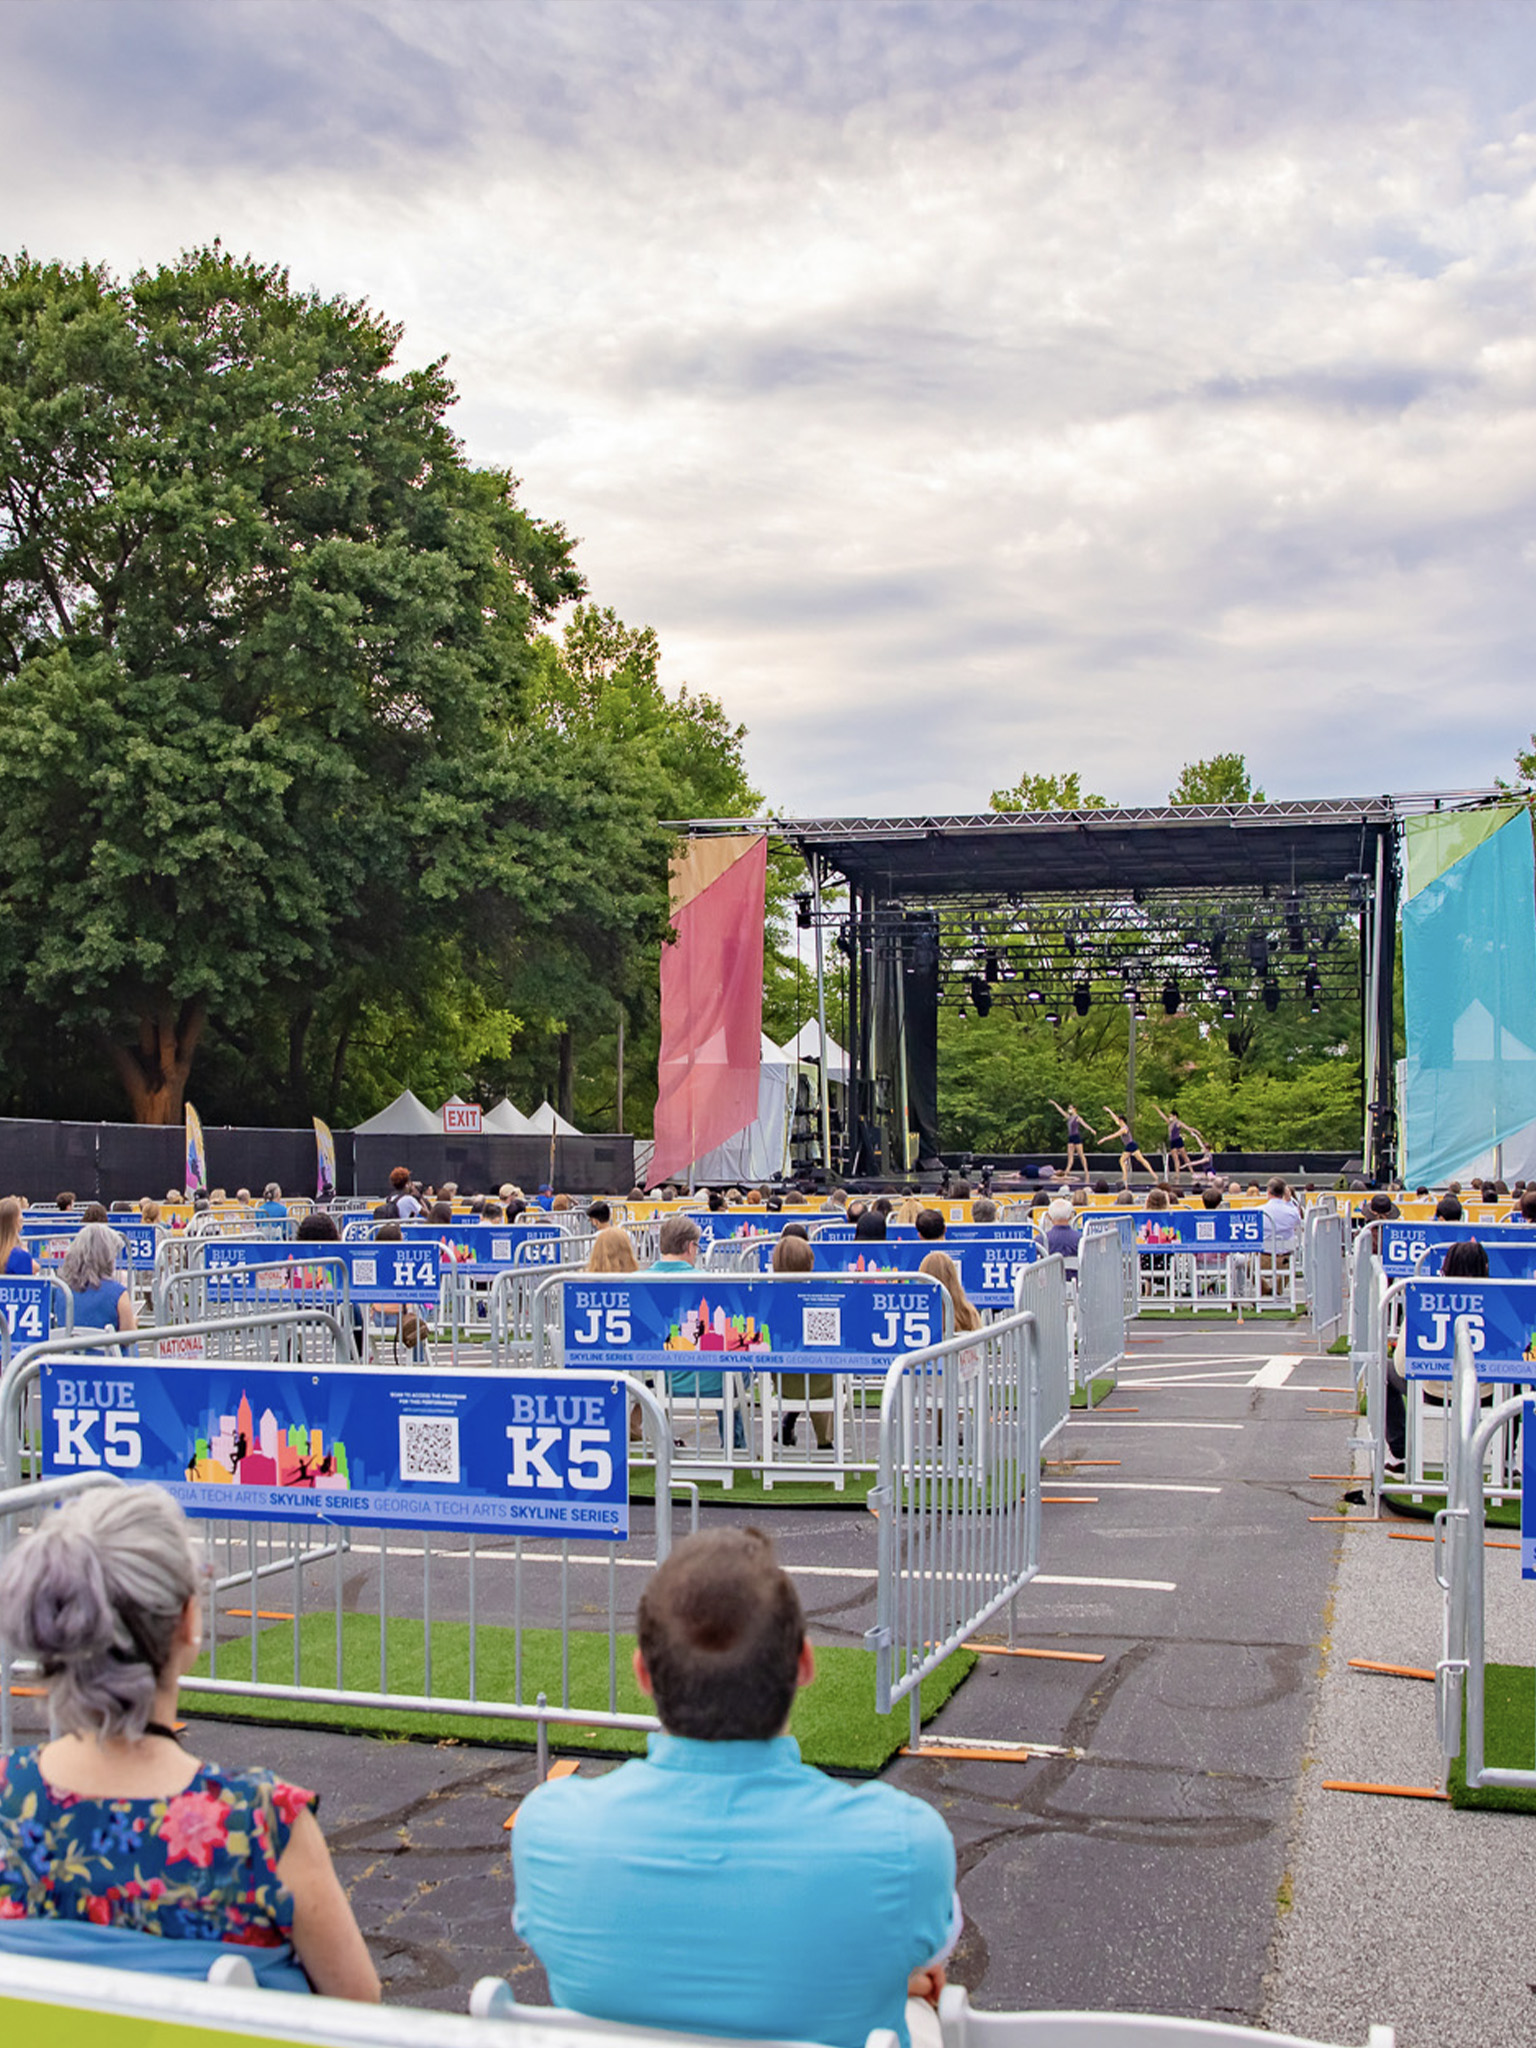 An outdoor stage is seen from the back audience